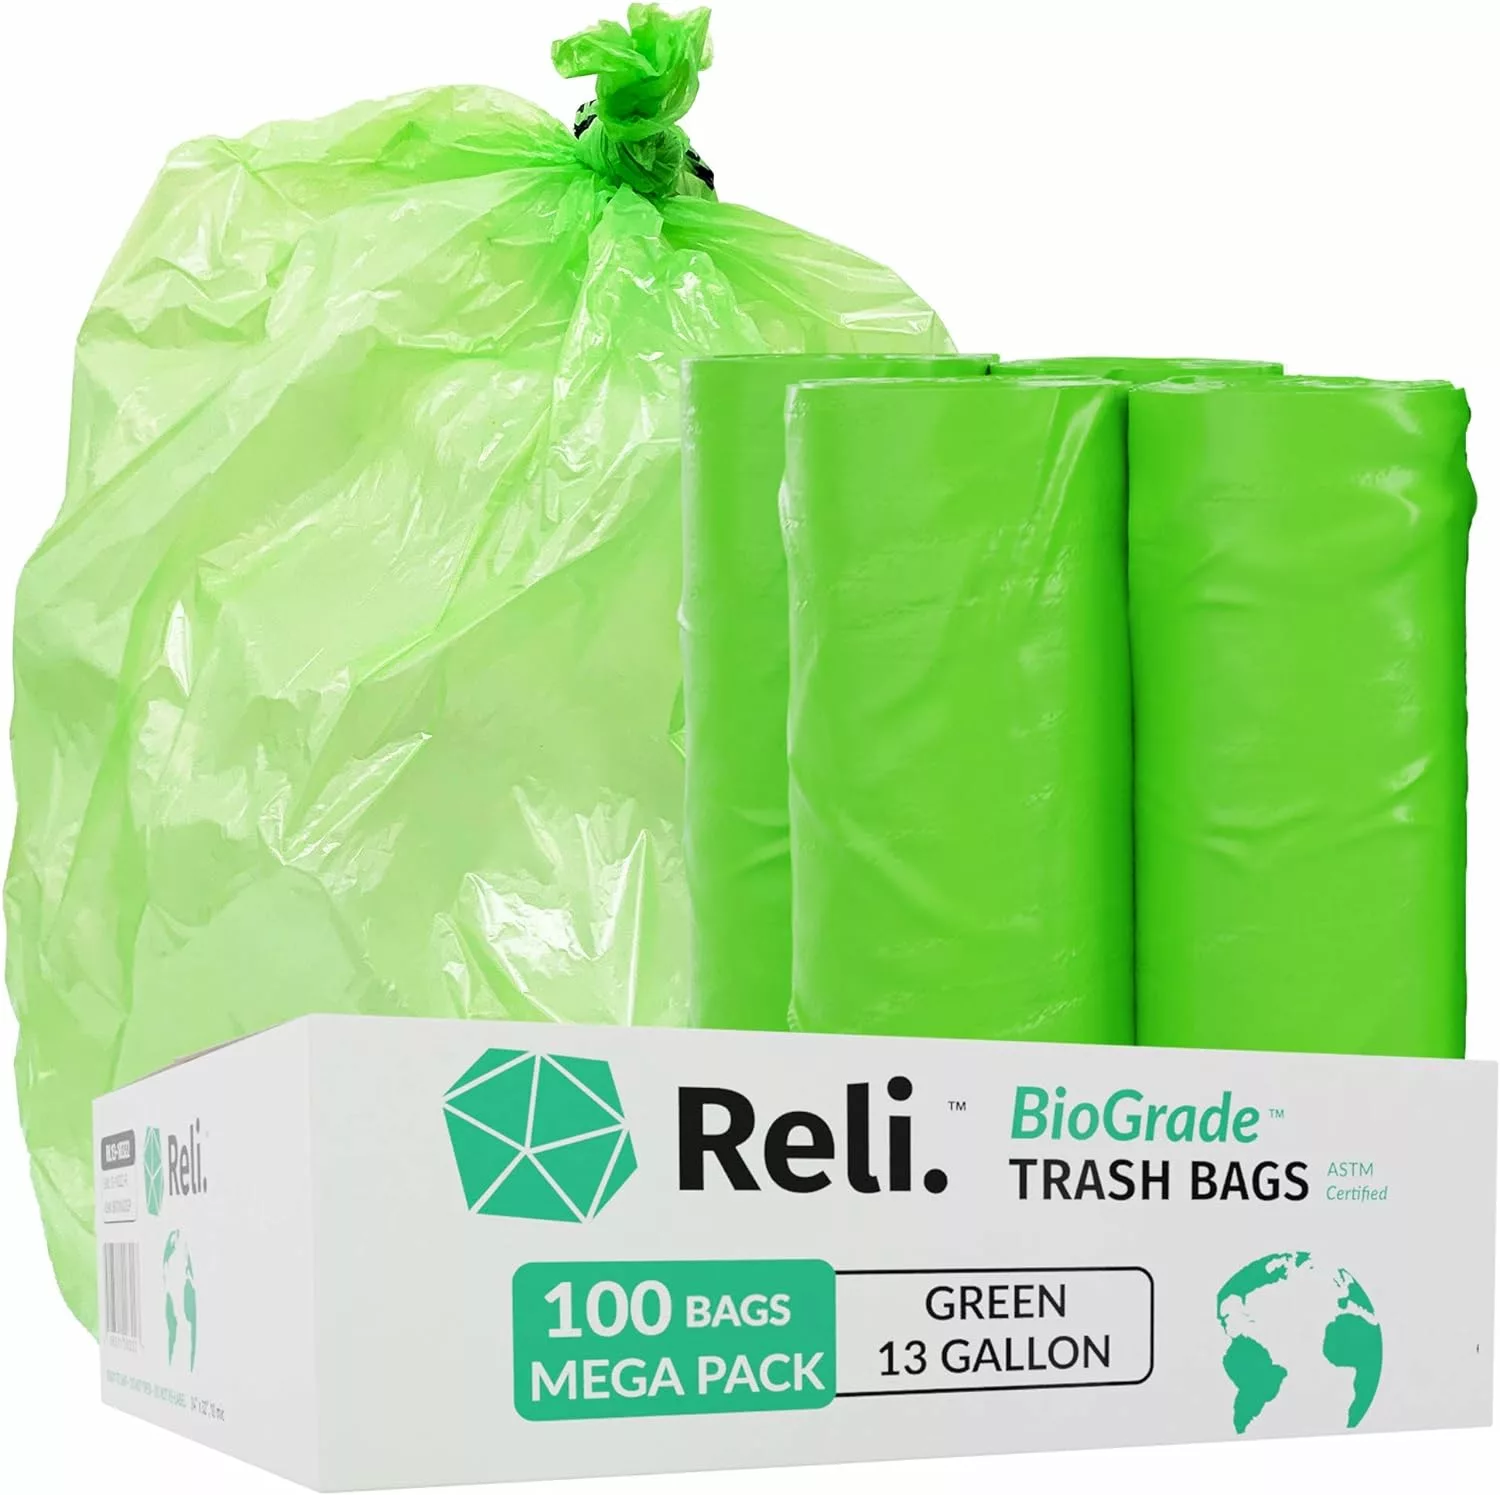 Discover the 9 Best Biodegradable Garbage Bags for Sustainable